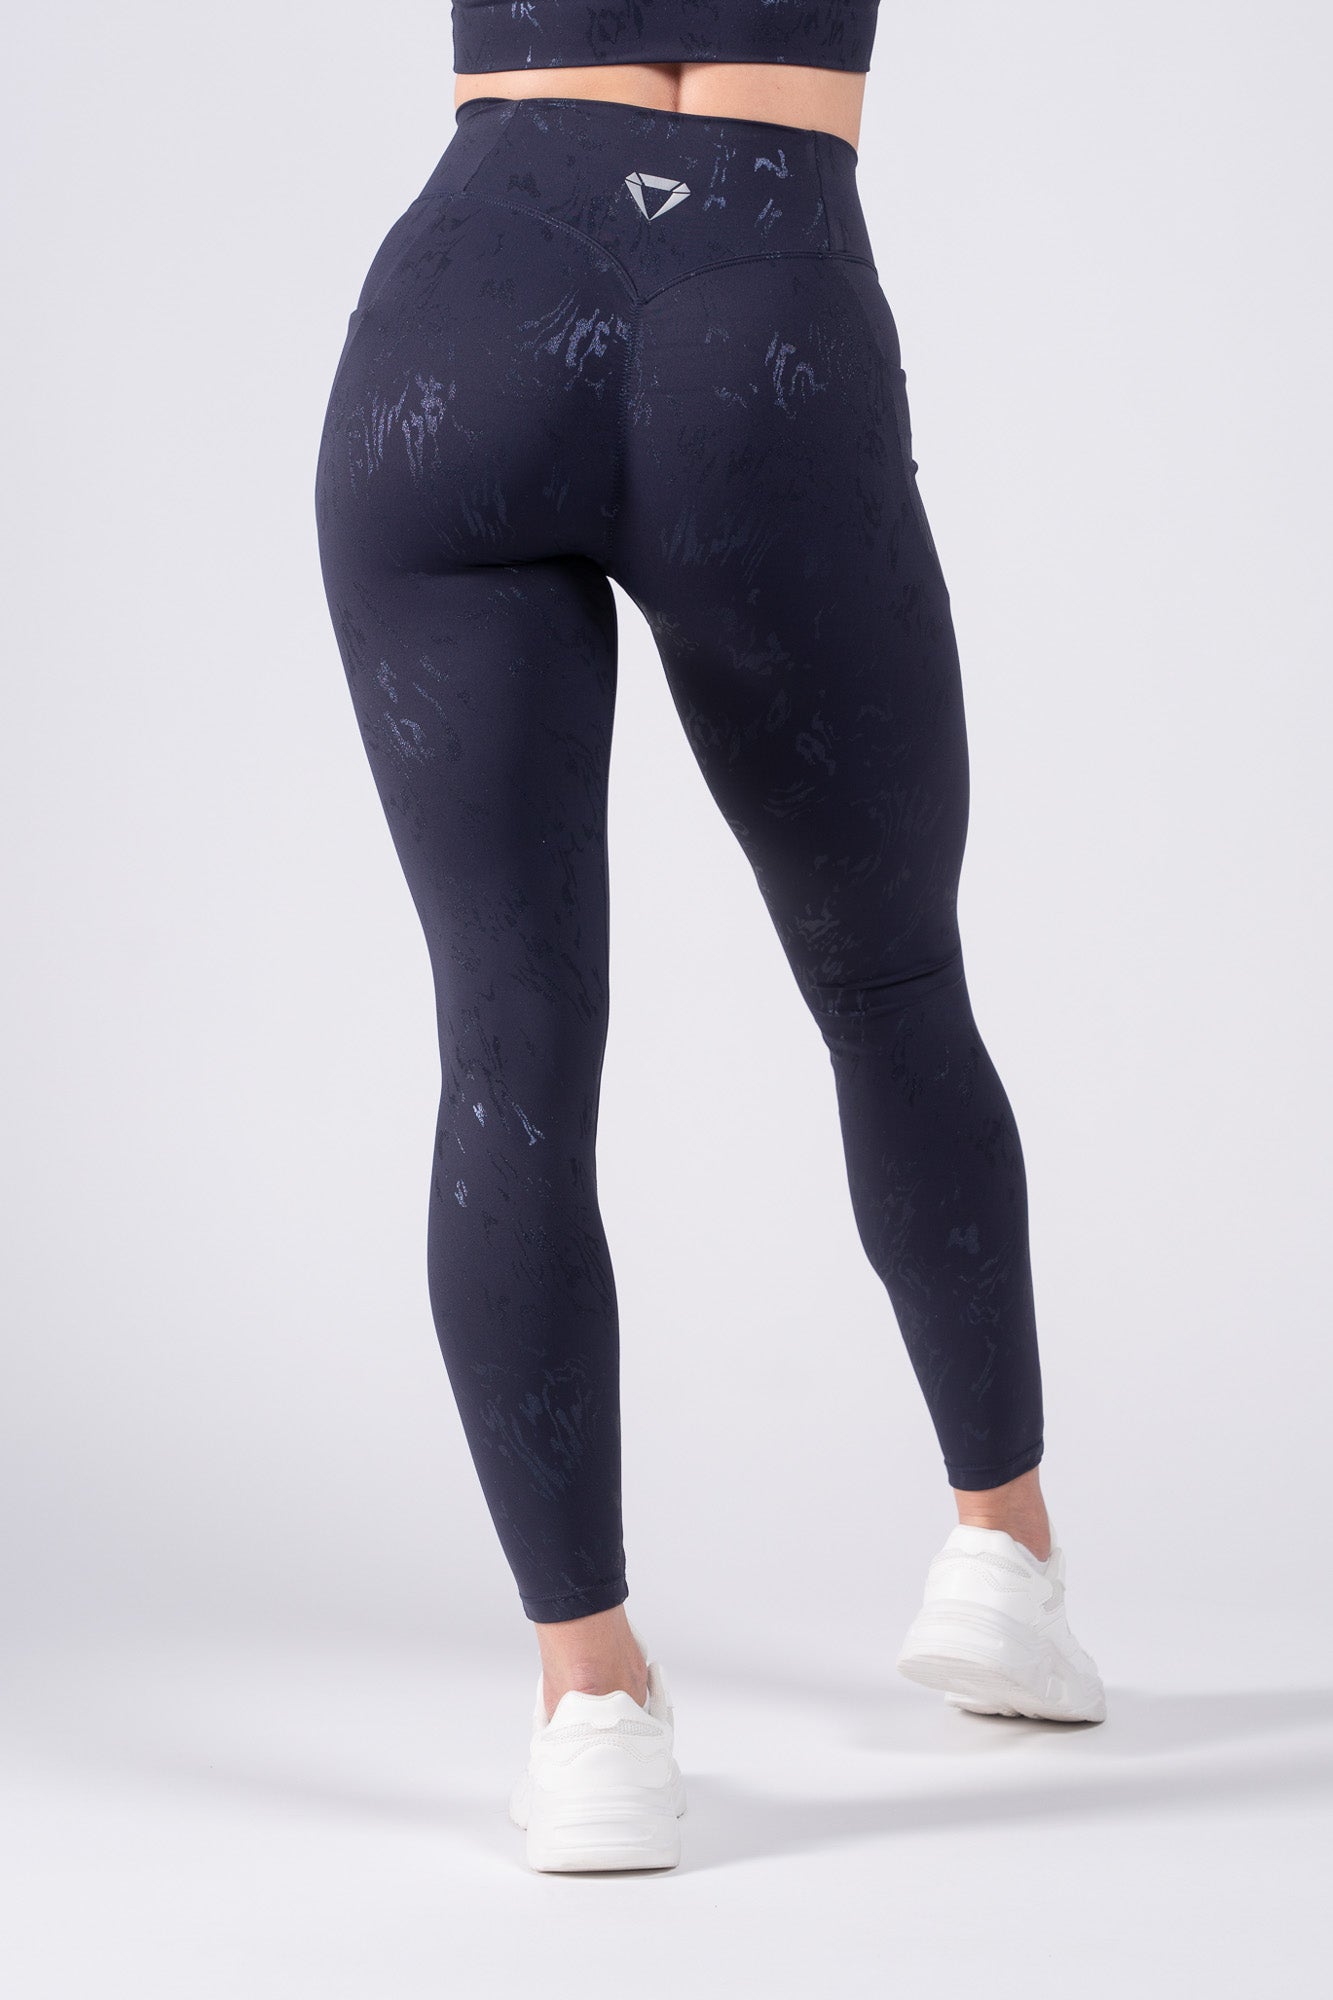 SECOND SKIN LEGGINGS - LIMITLESS EDITION